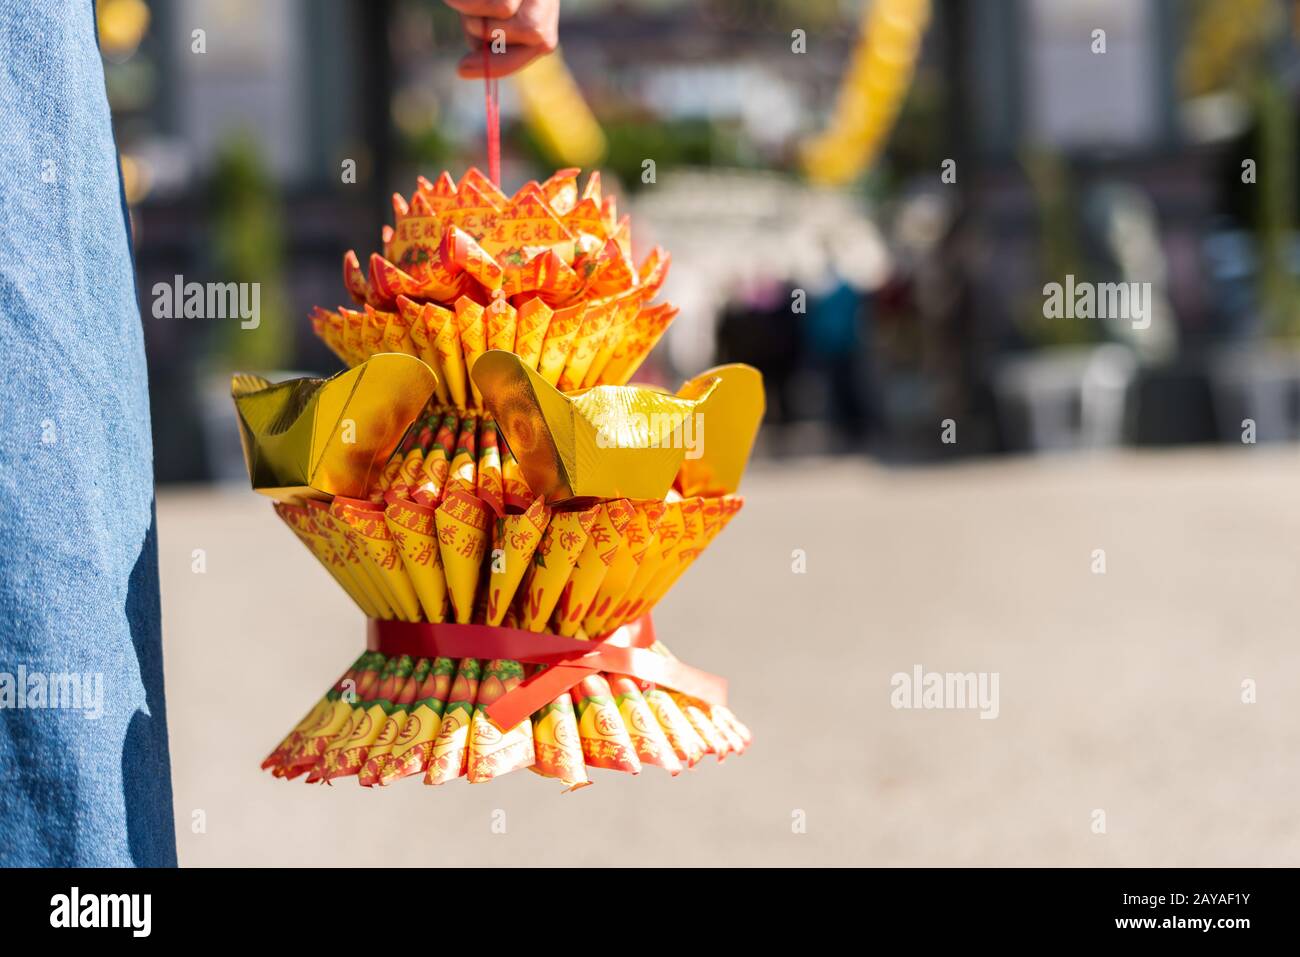 folded joss paper burned during Chinese funerals or as offering Stock Photo  - Alamy